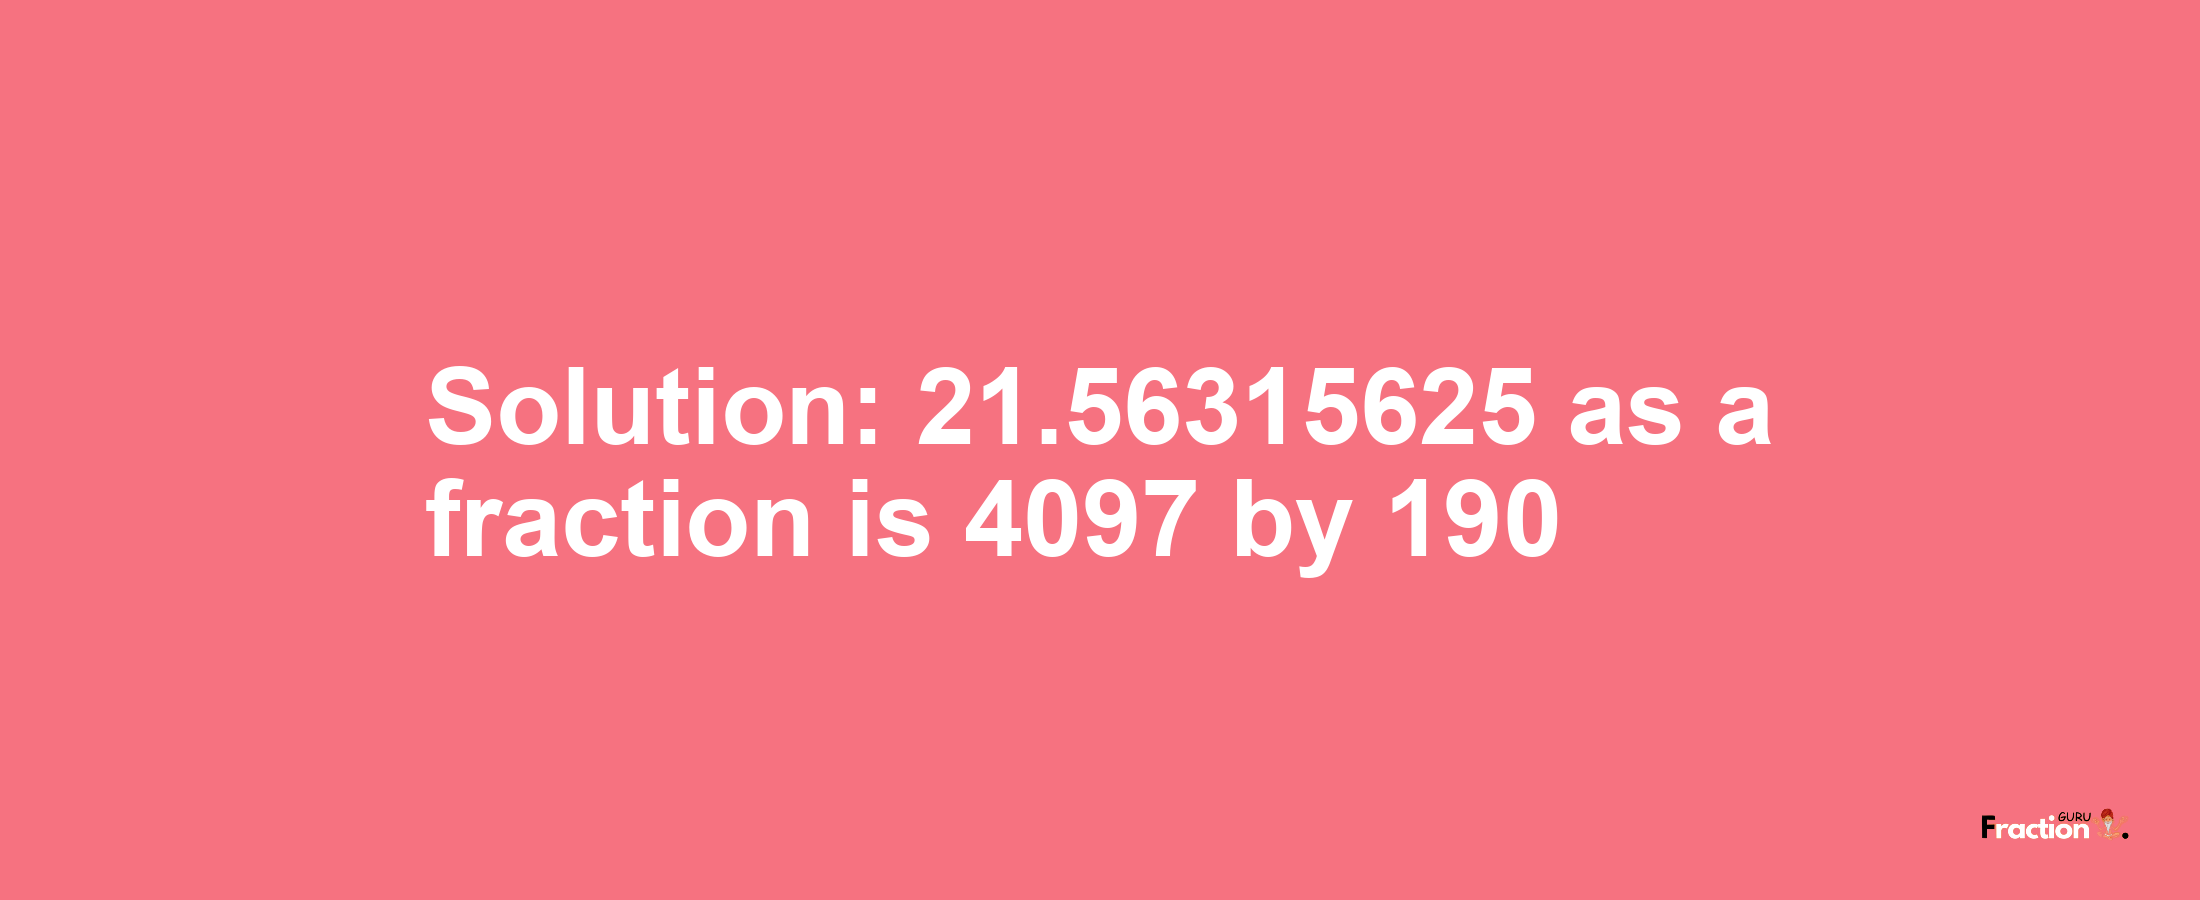 Solution:21.56315625 as a fraction is 4097/190